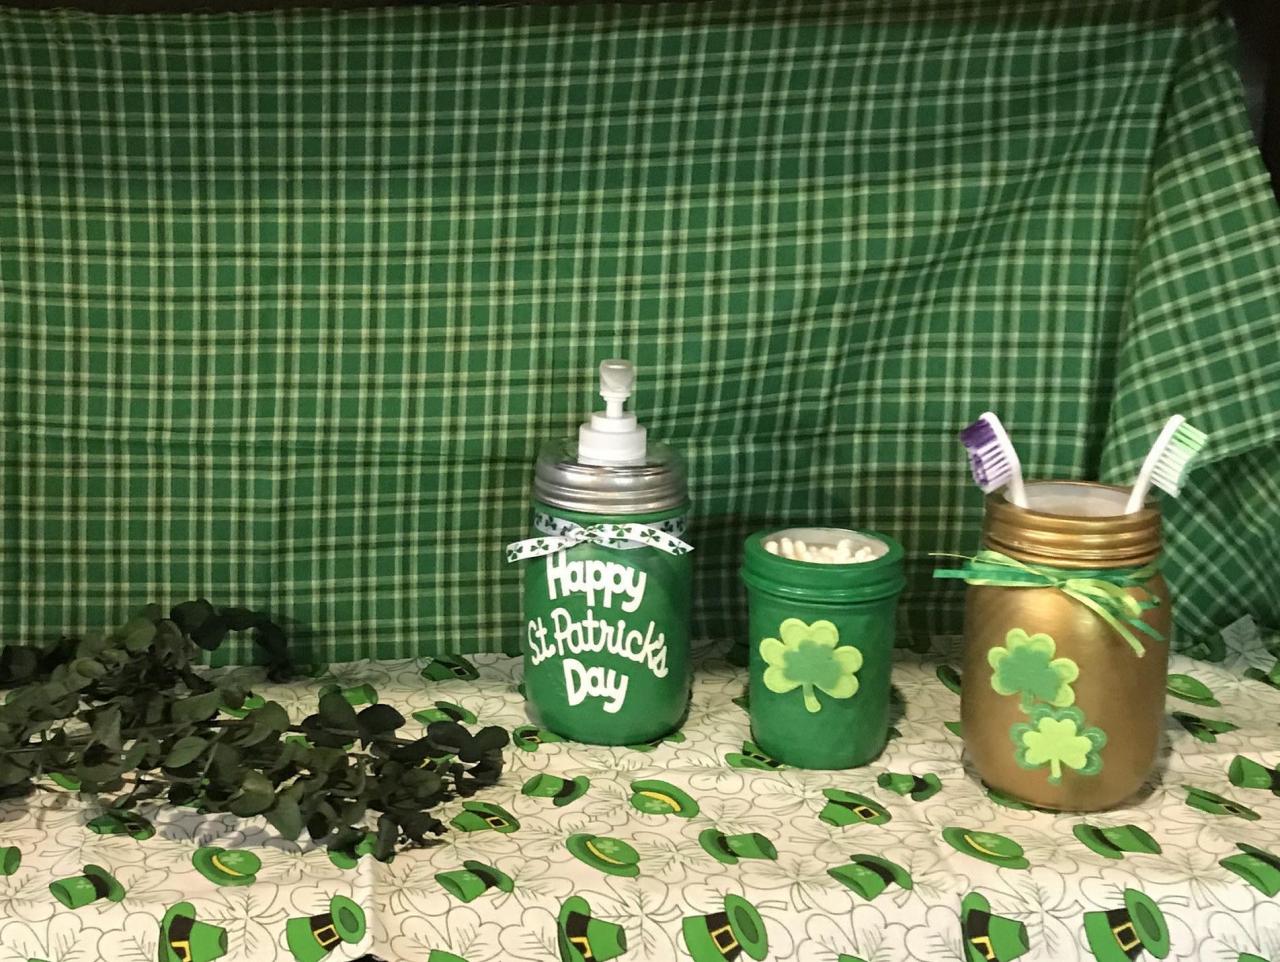 Excited to share the latest addition to my etsy shop St Patrick's Day